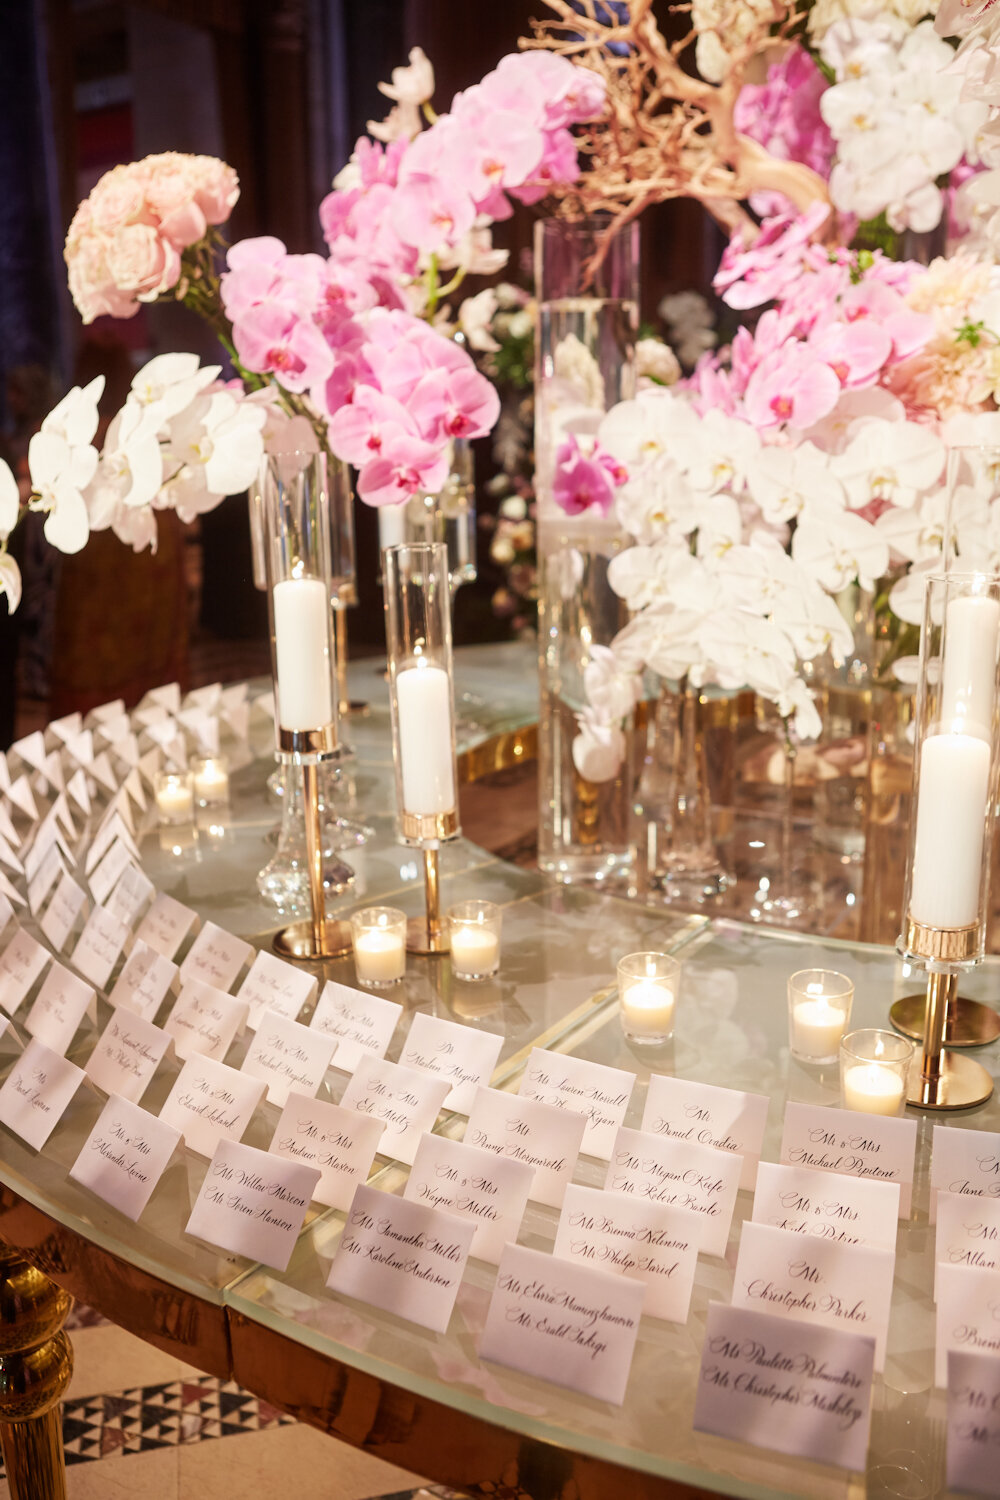 Cipriani 42nd Street wedding escort card table with calligraphy escort cards